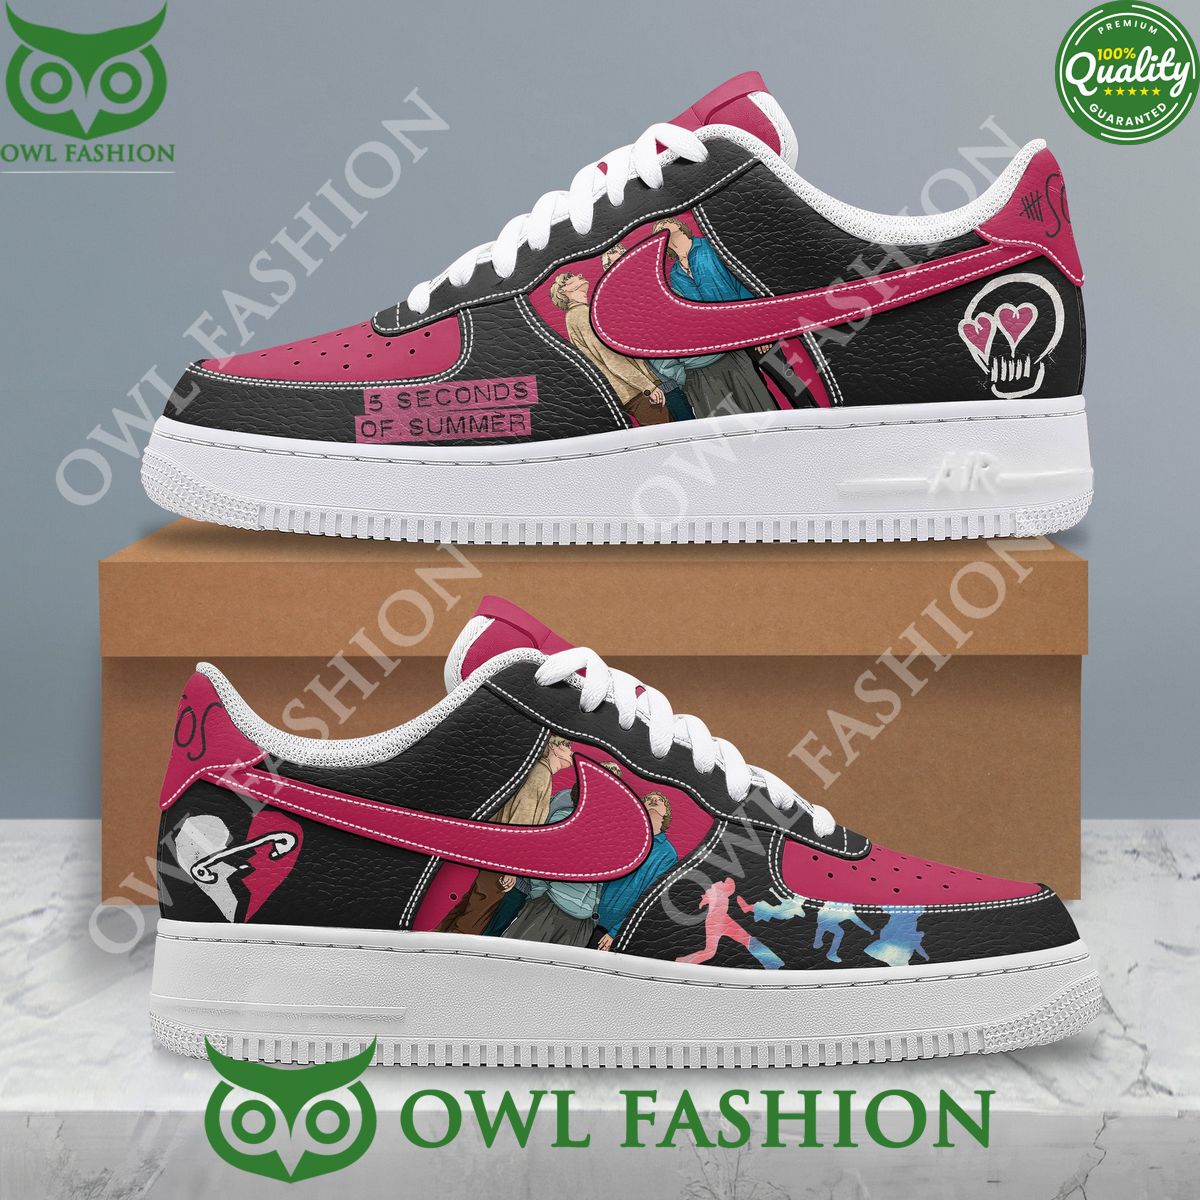 5 seconds of summer pop band pink heart 5sos5 air force 1 shoes 1 ukSdQ.jpg